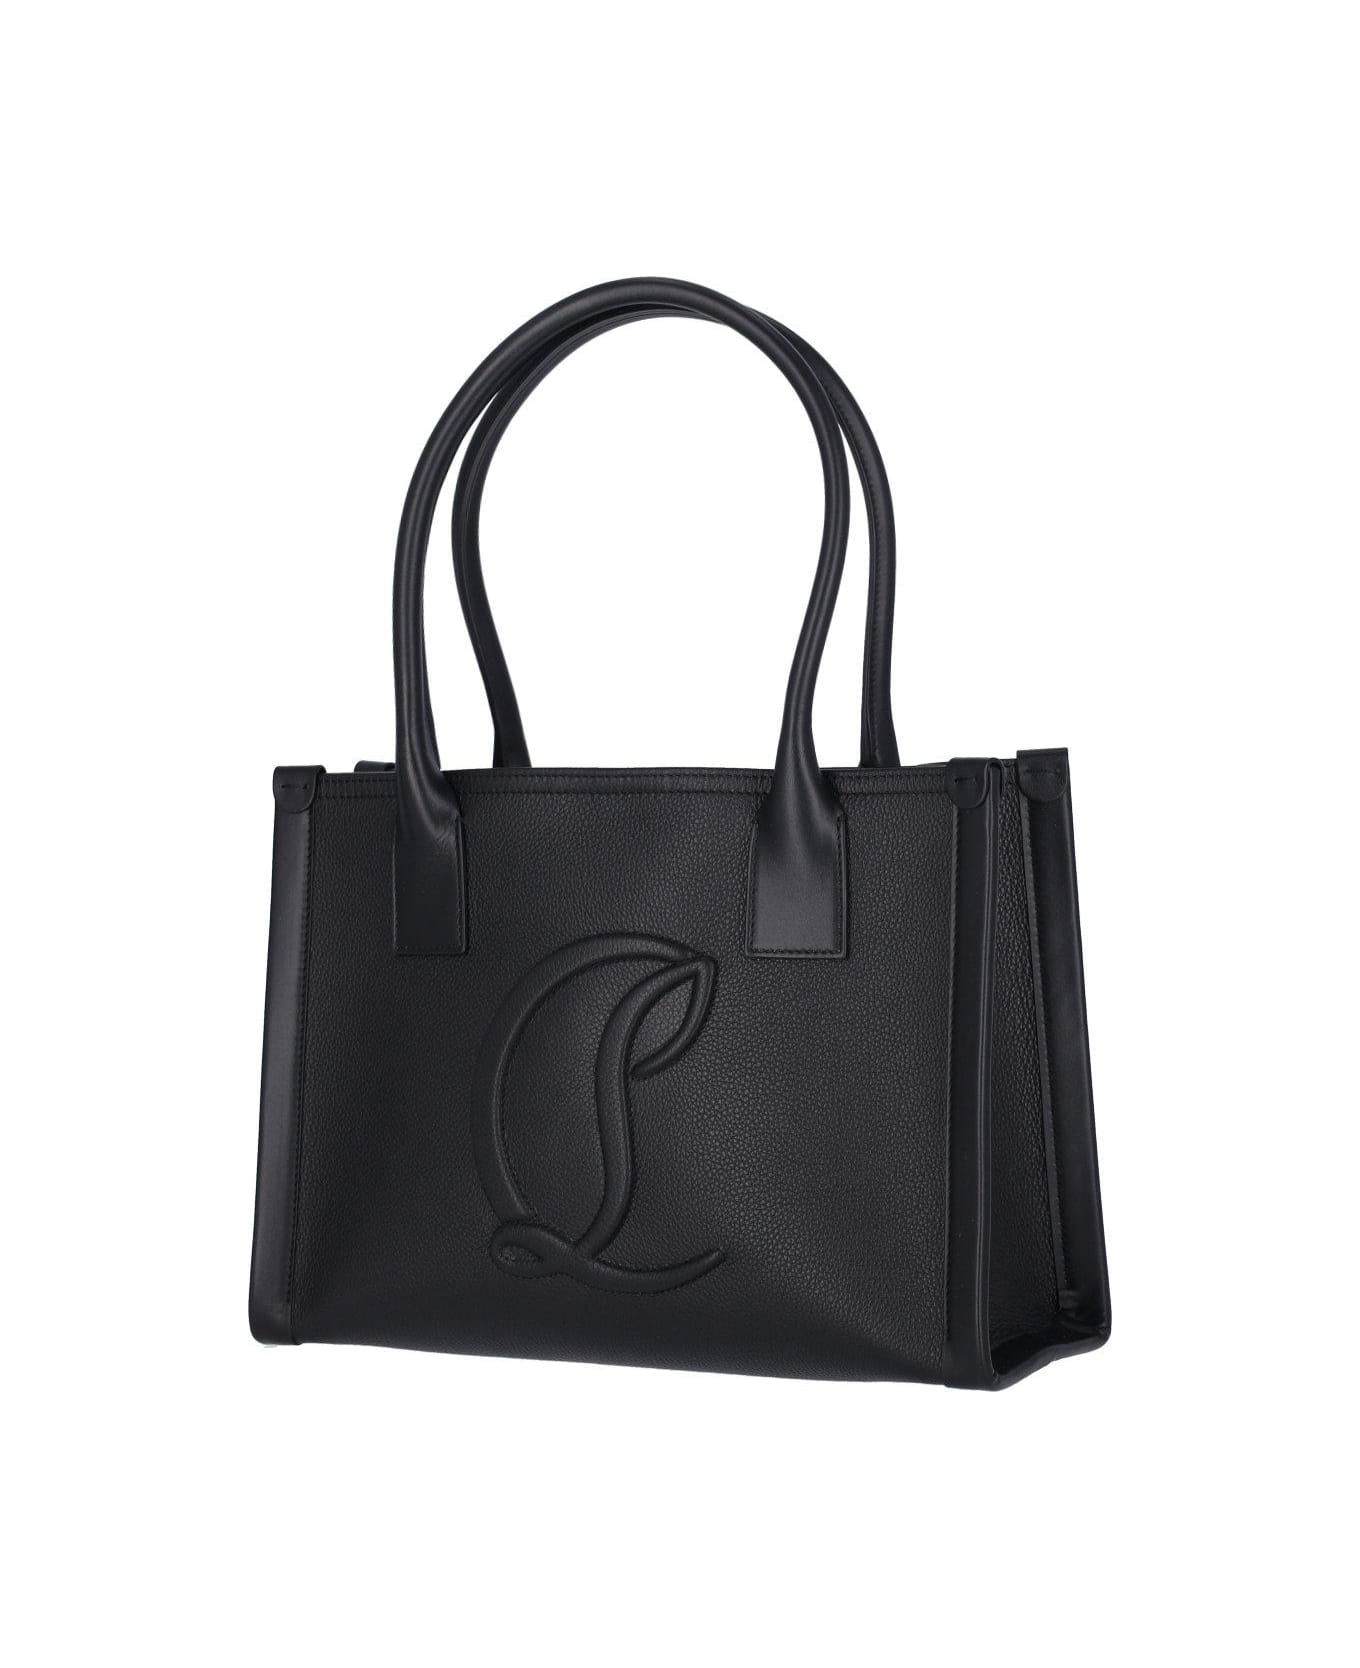 Christian Louboutin By My Side Small Tote Bag - Black/black/black トートバッグ